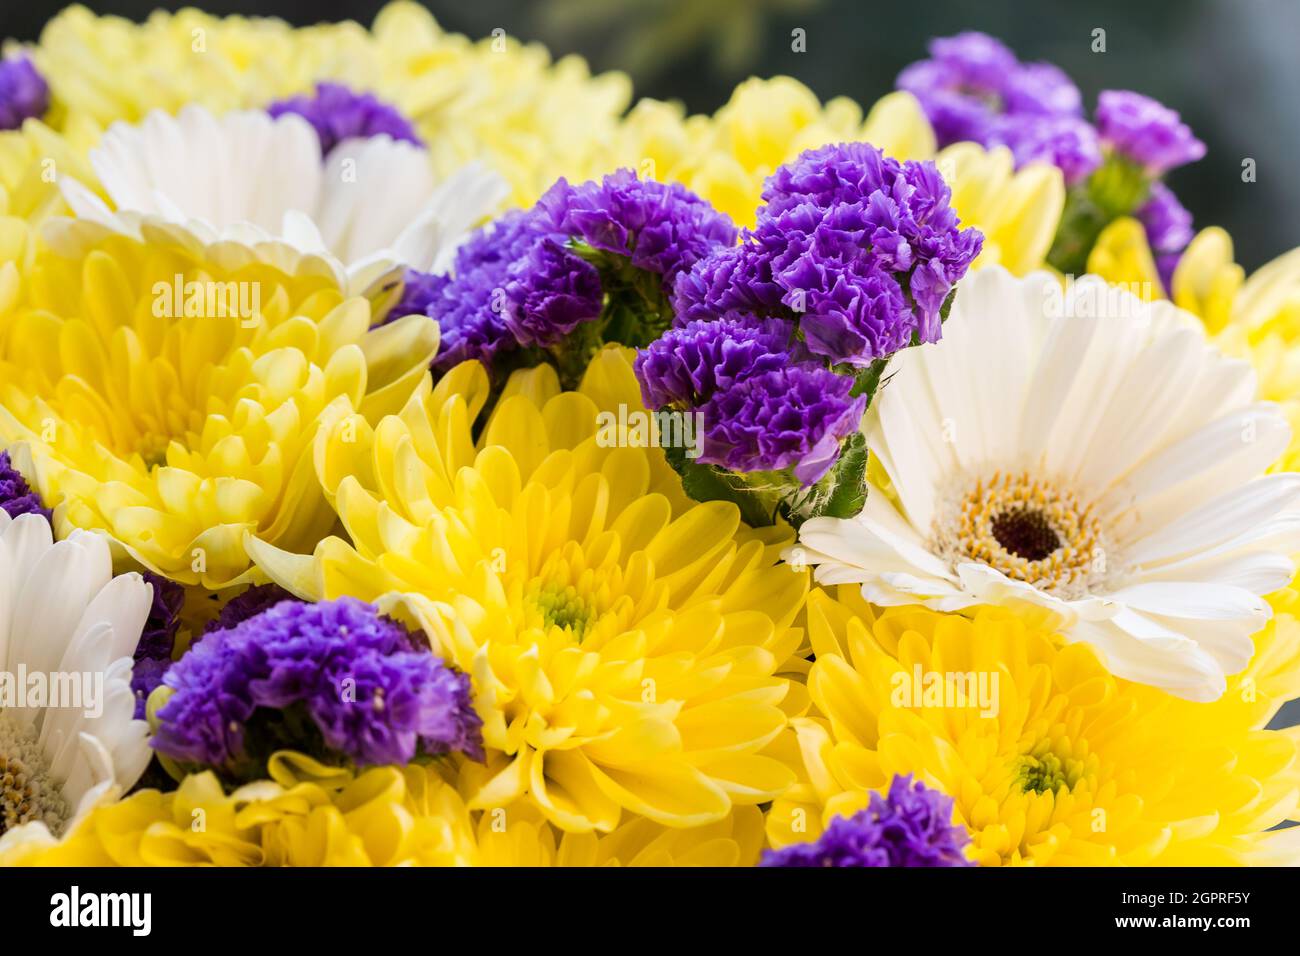 Bouquet of yellow chrysanthemums, white gerberas and purple flowers Stock Photo